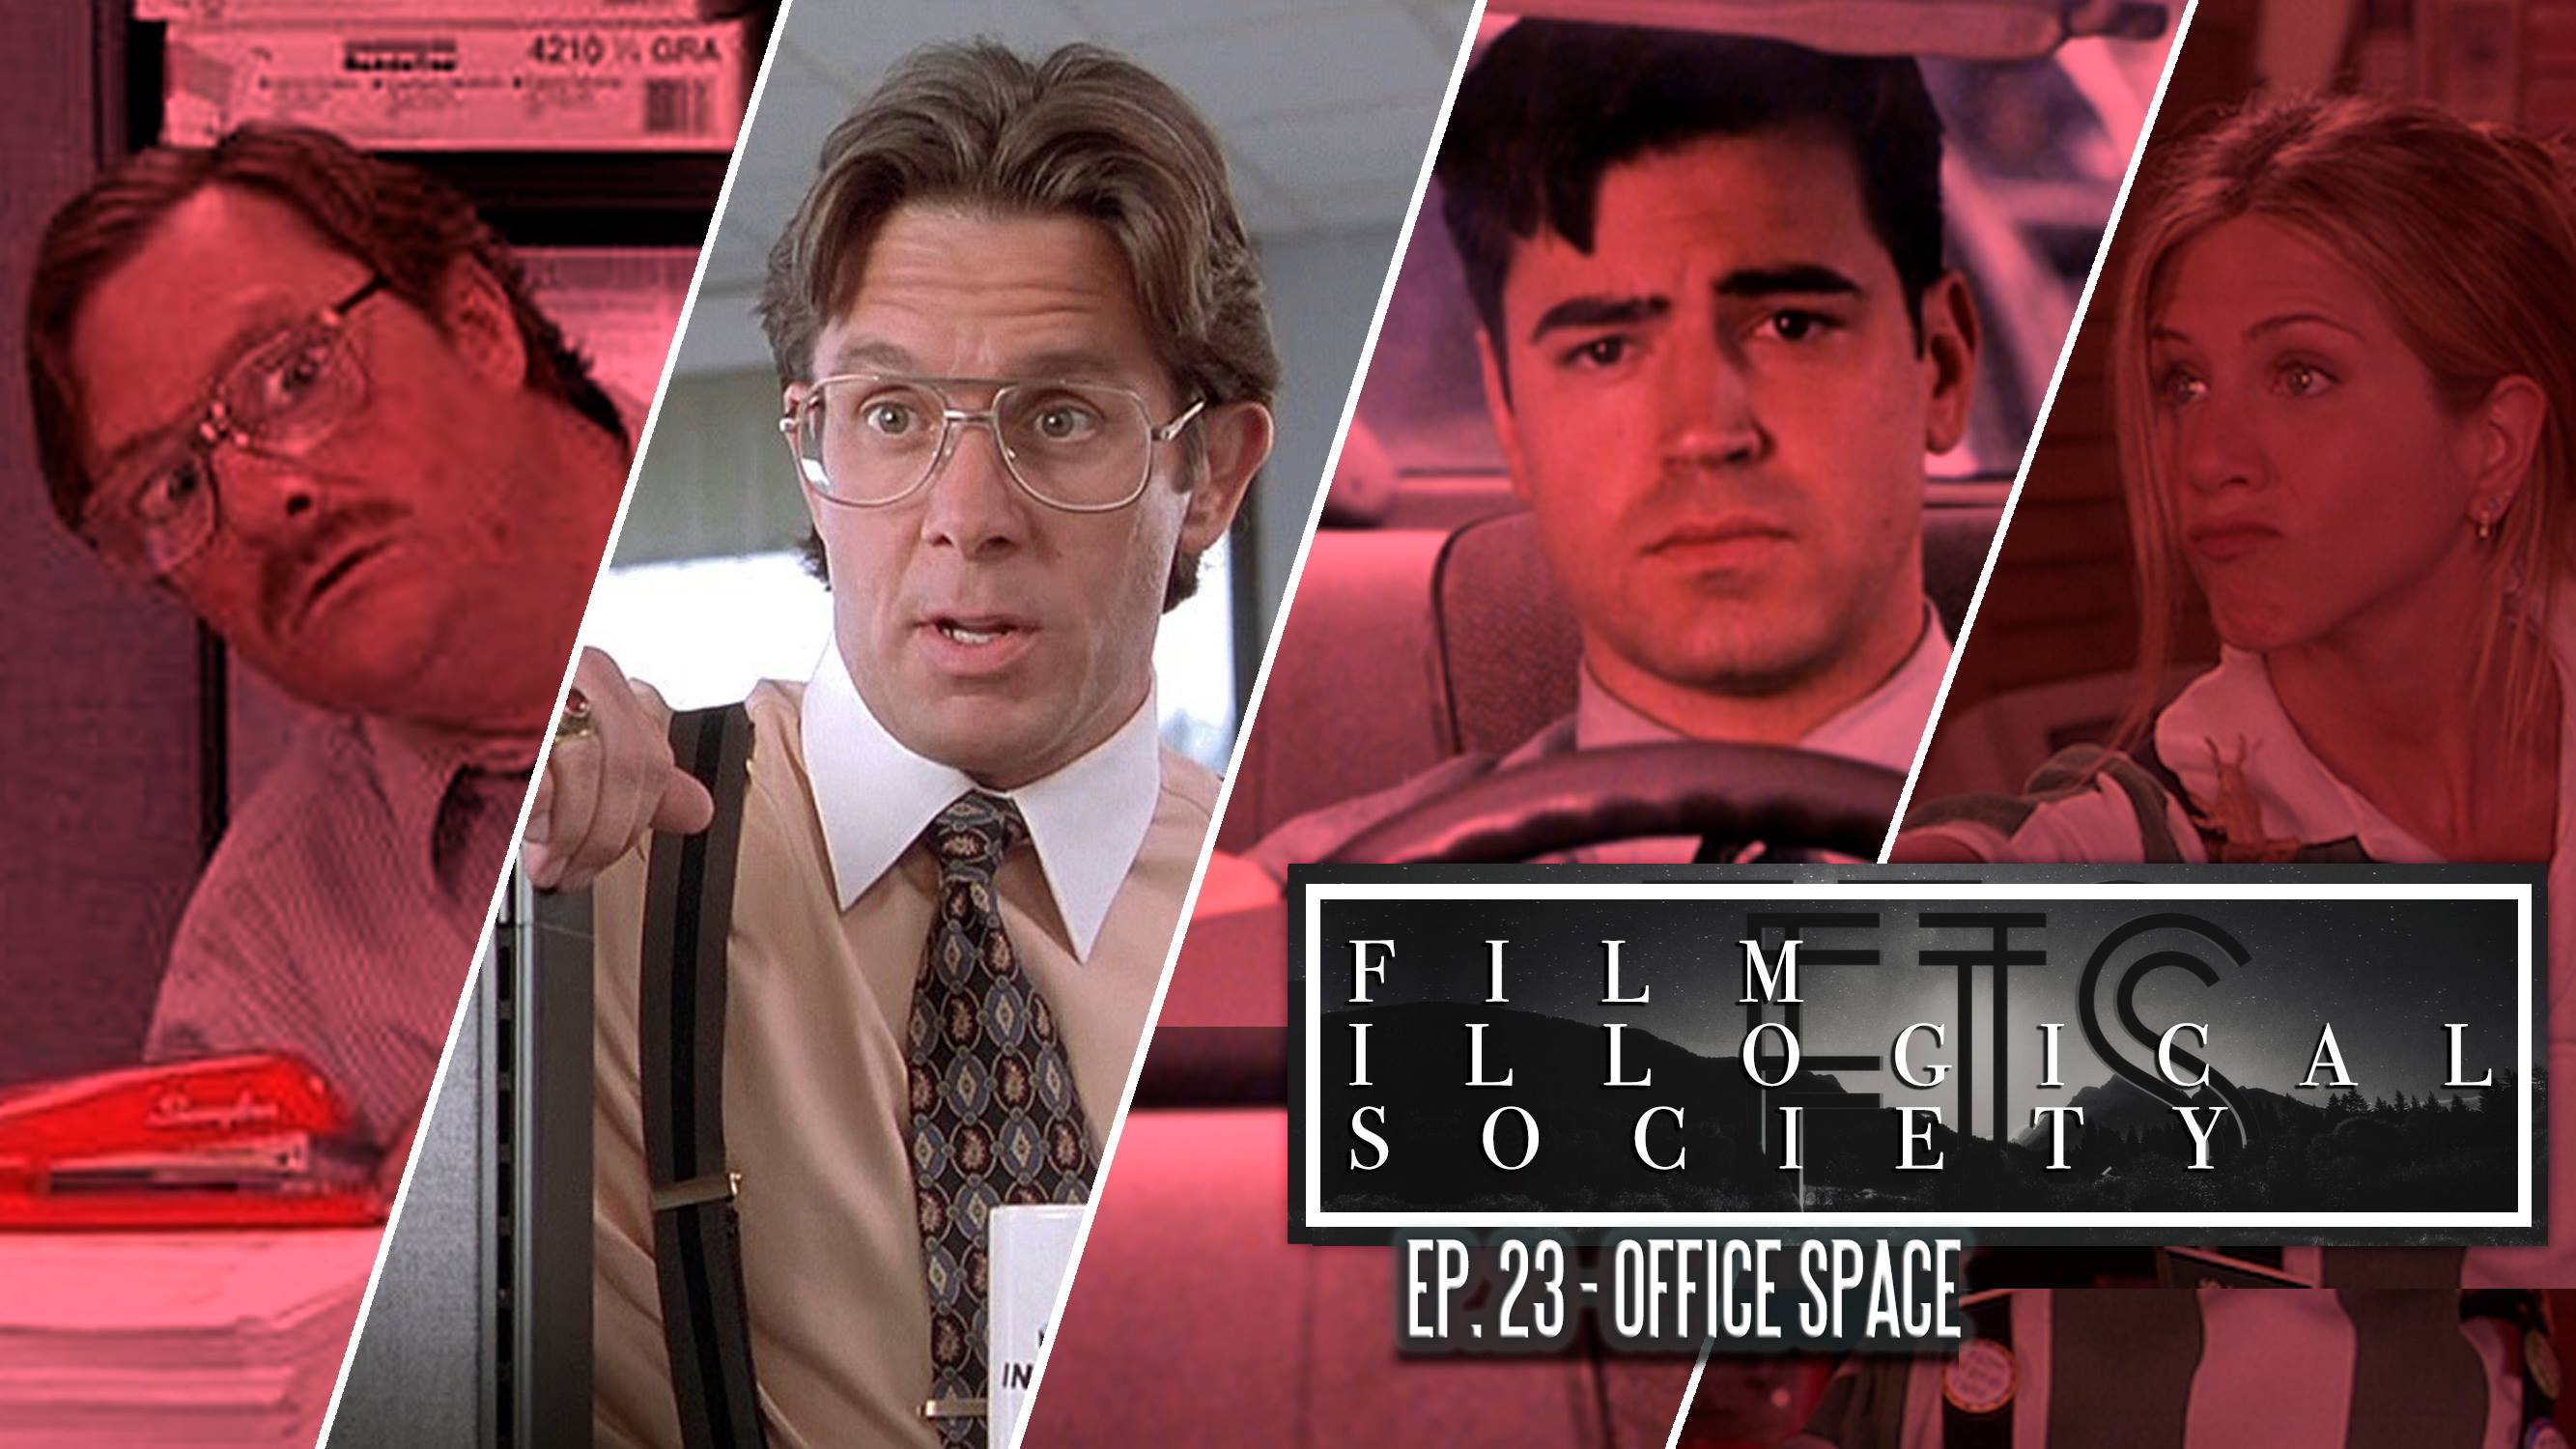 23 – Office Space